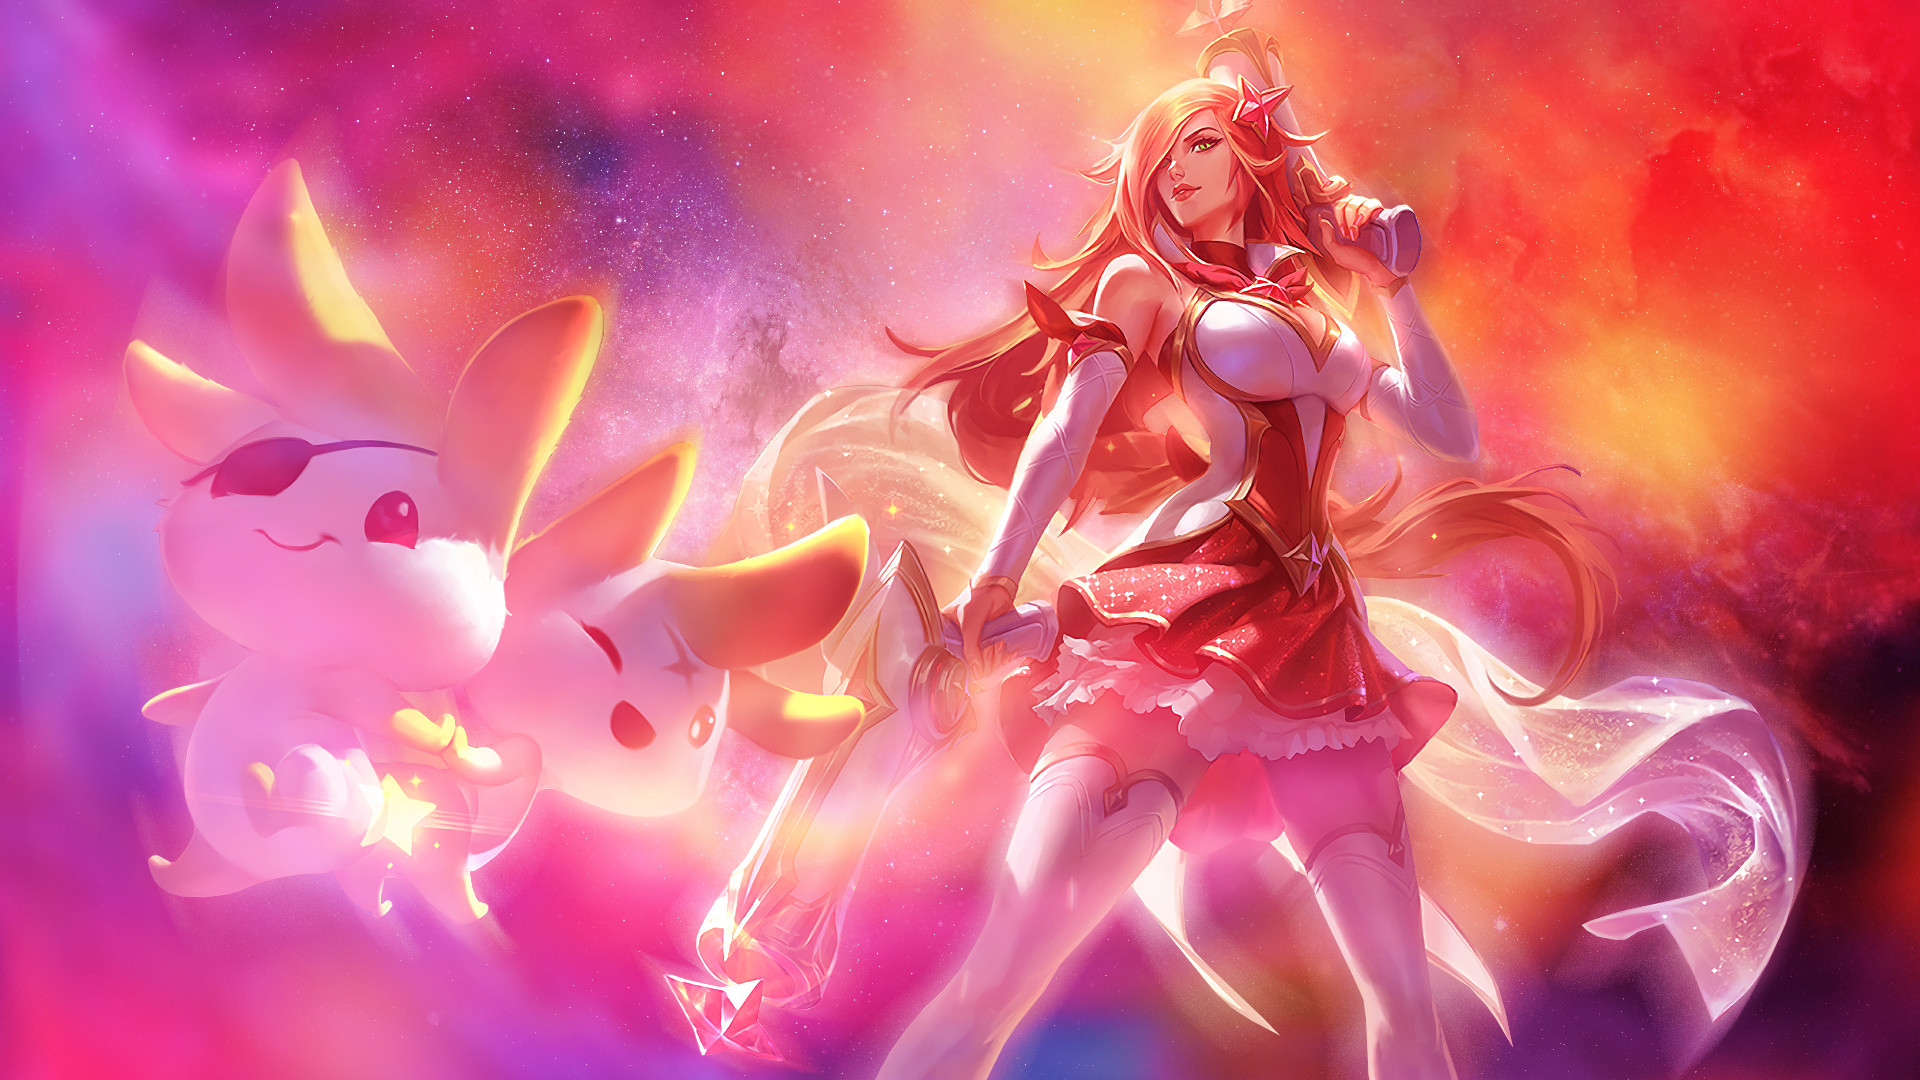 1920x1080 ... Star Guardian Miss Fortune - Wallpaper by Psychomilla